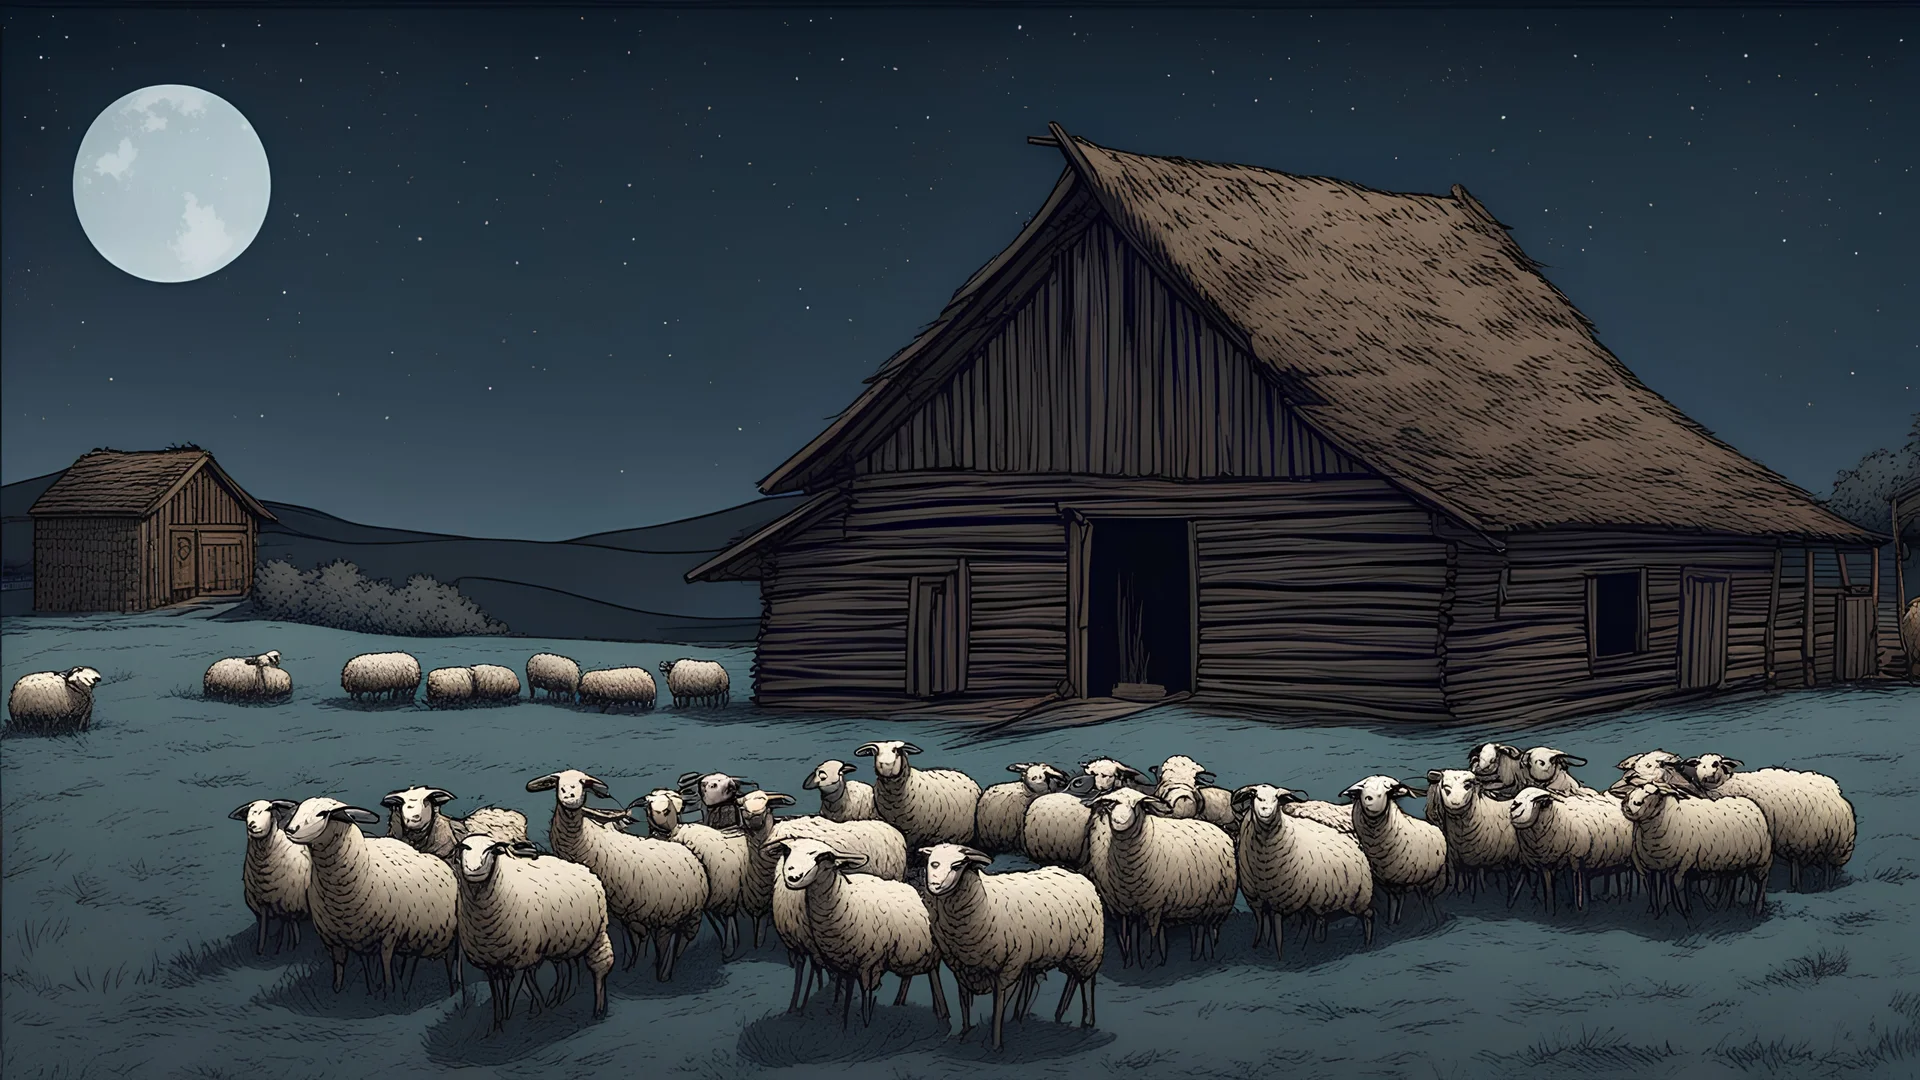 The sky at dark night is blue with stars and some sheep in the barn 2000 years ago